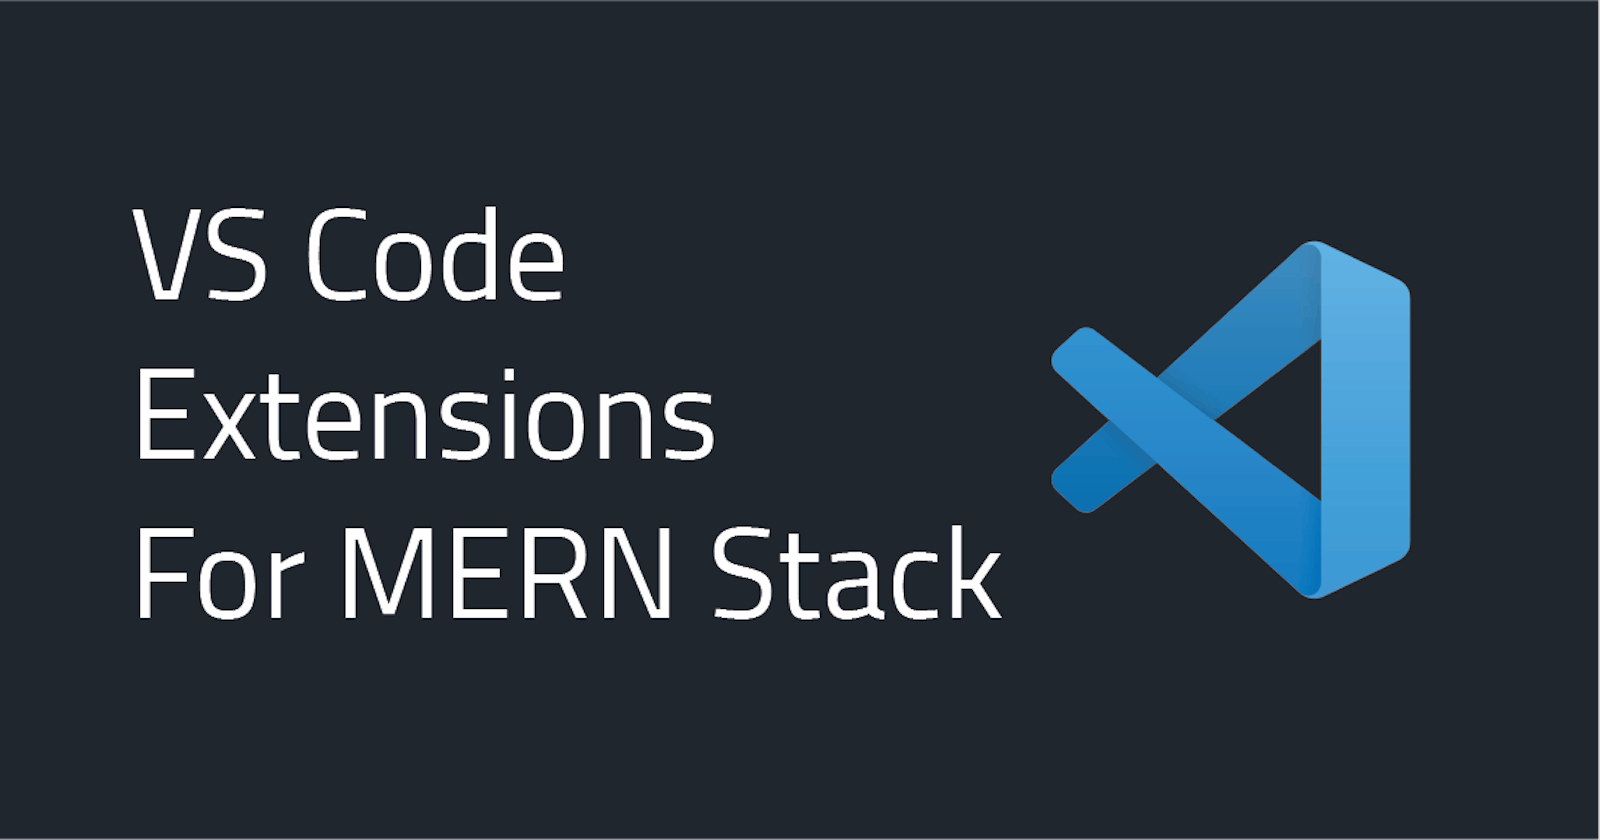 VS Code Extensions for MERN Stack